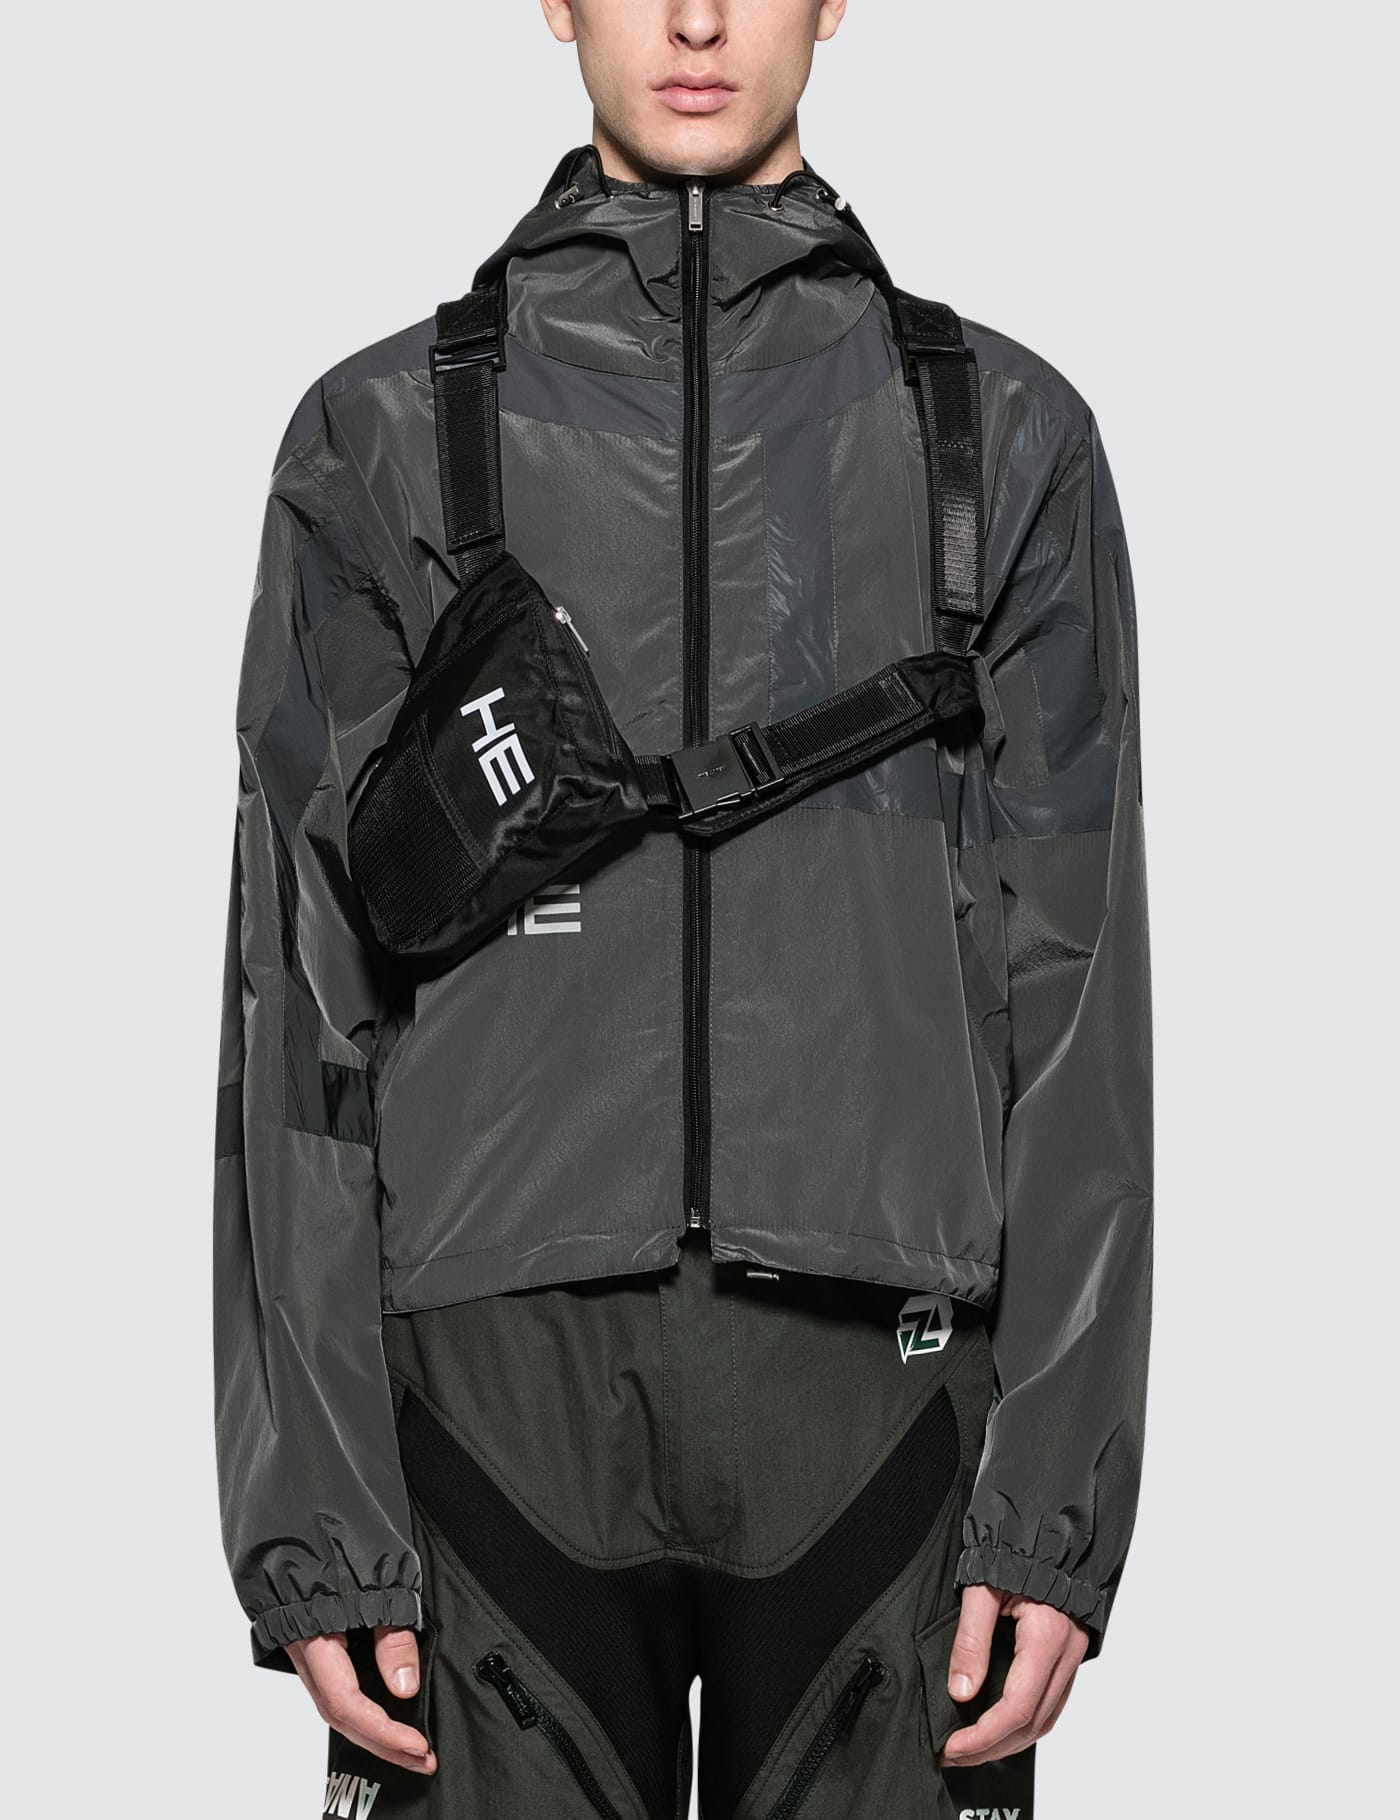 Heliot Emil - Technical Fabric Jacket with Chest Bag | HBX ...